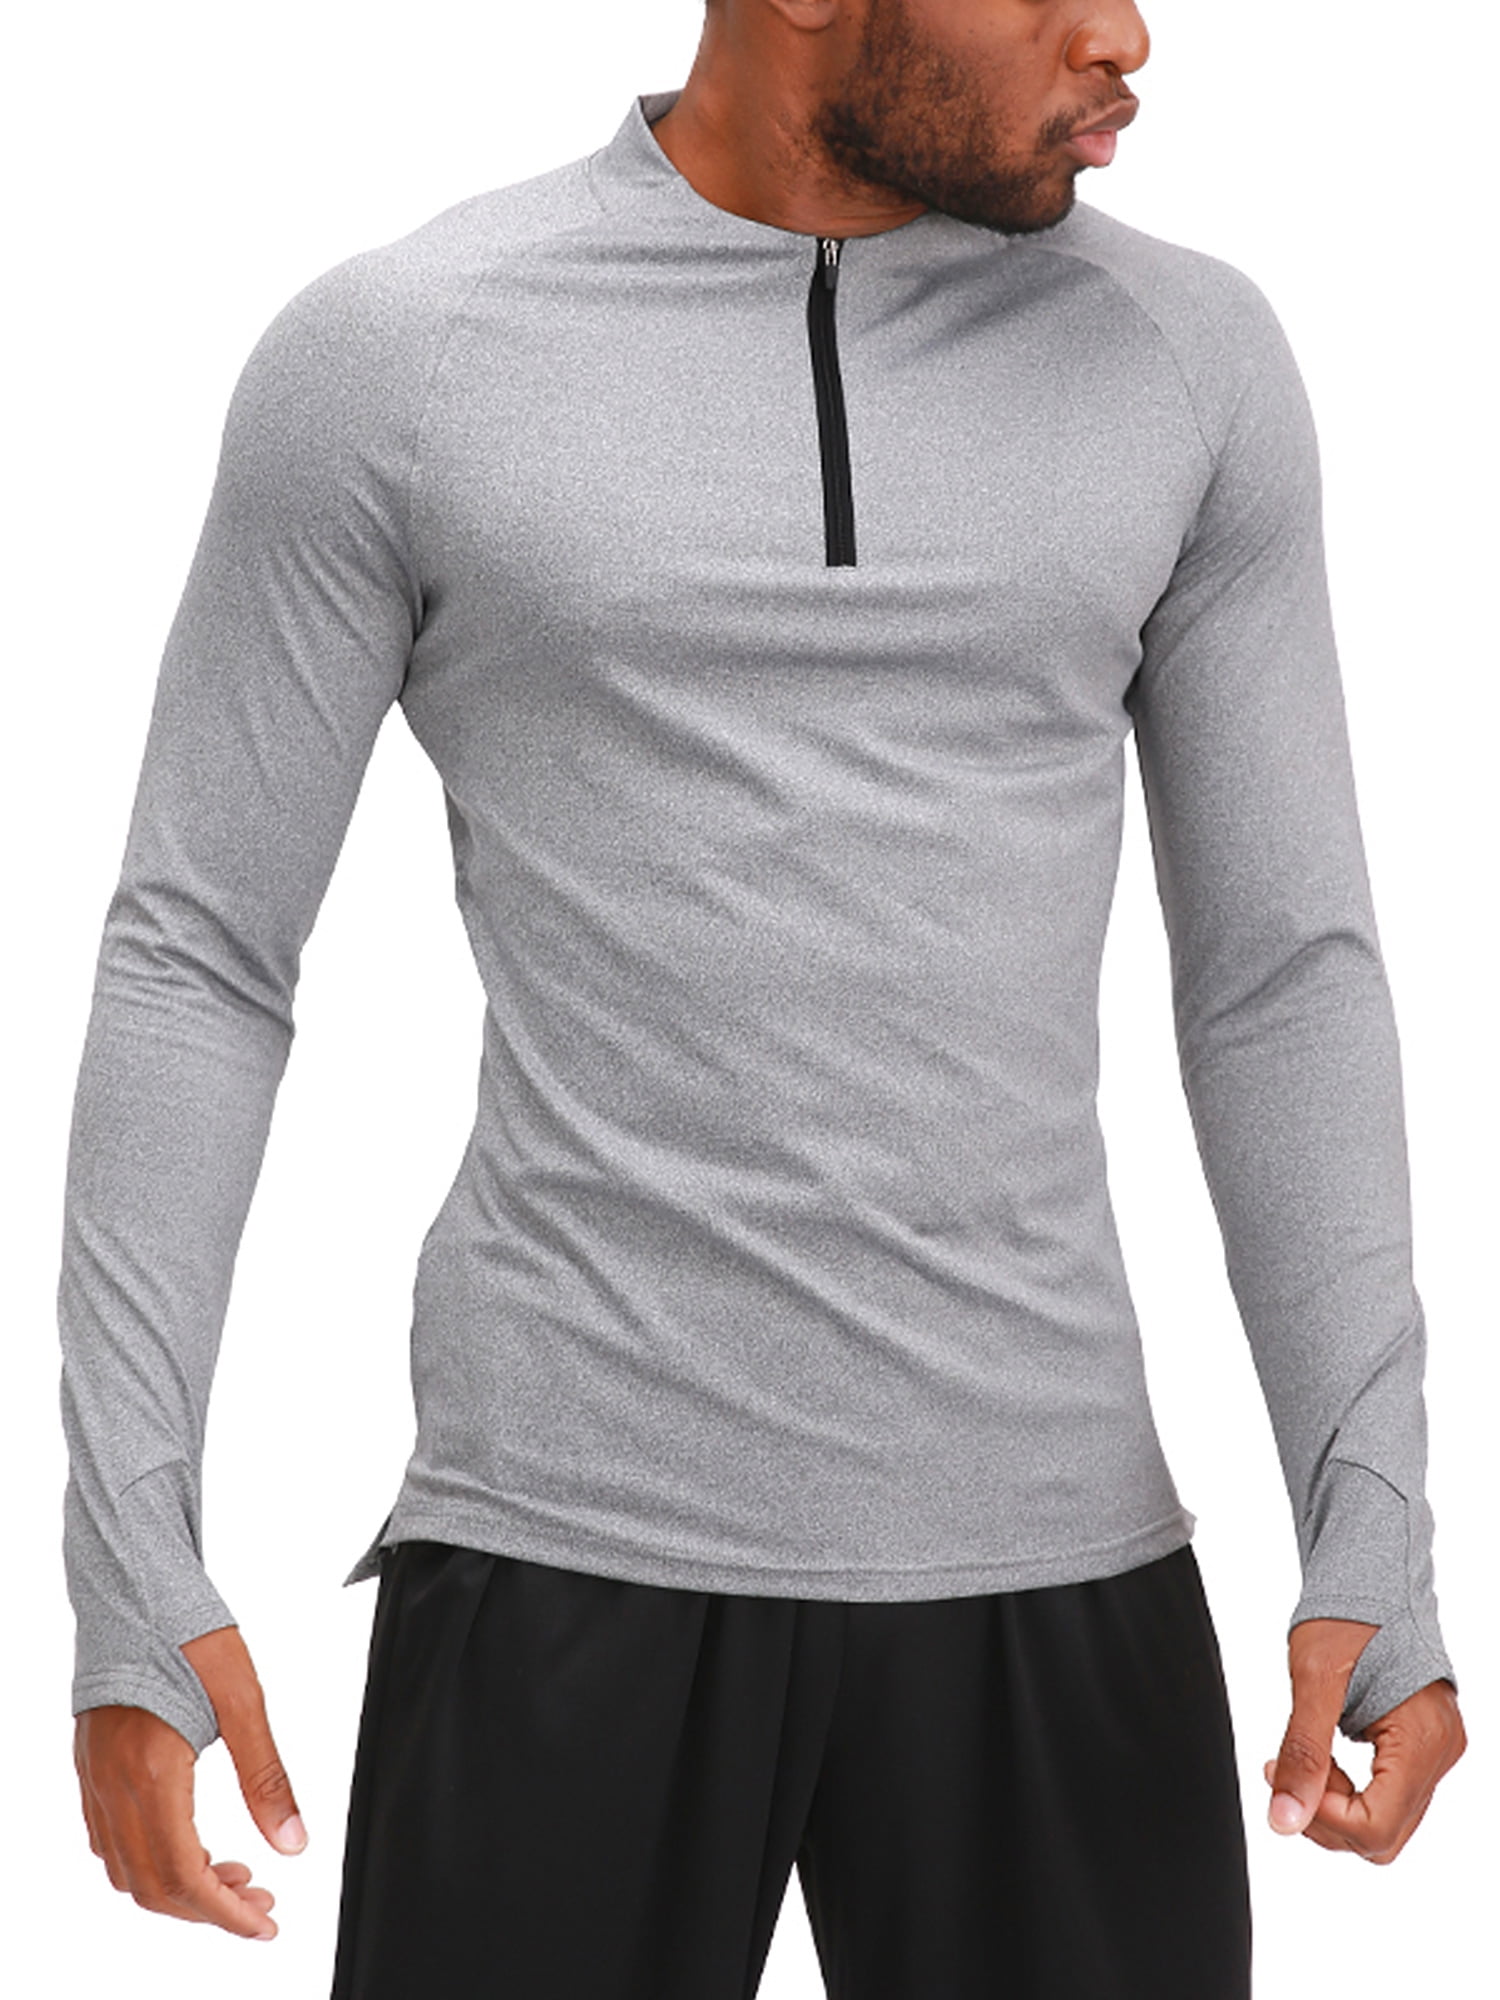 Men's Compression T Shirts Running Basketball Training Tops Gym Athletic Wicking 